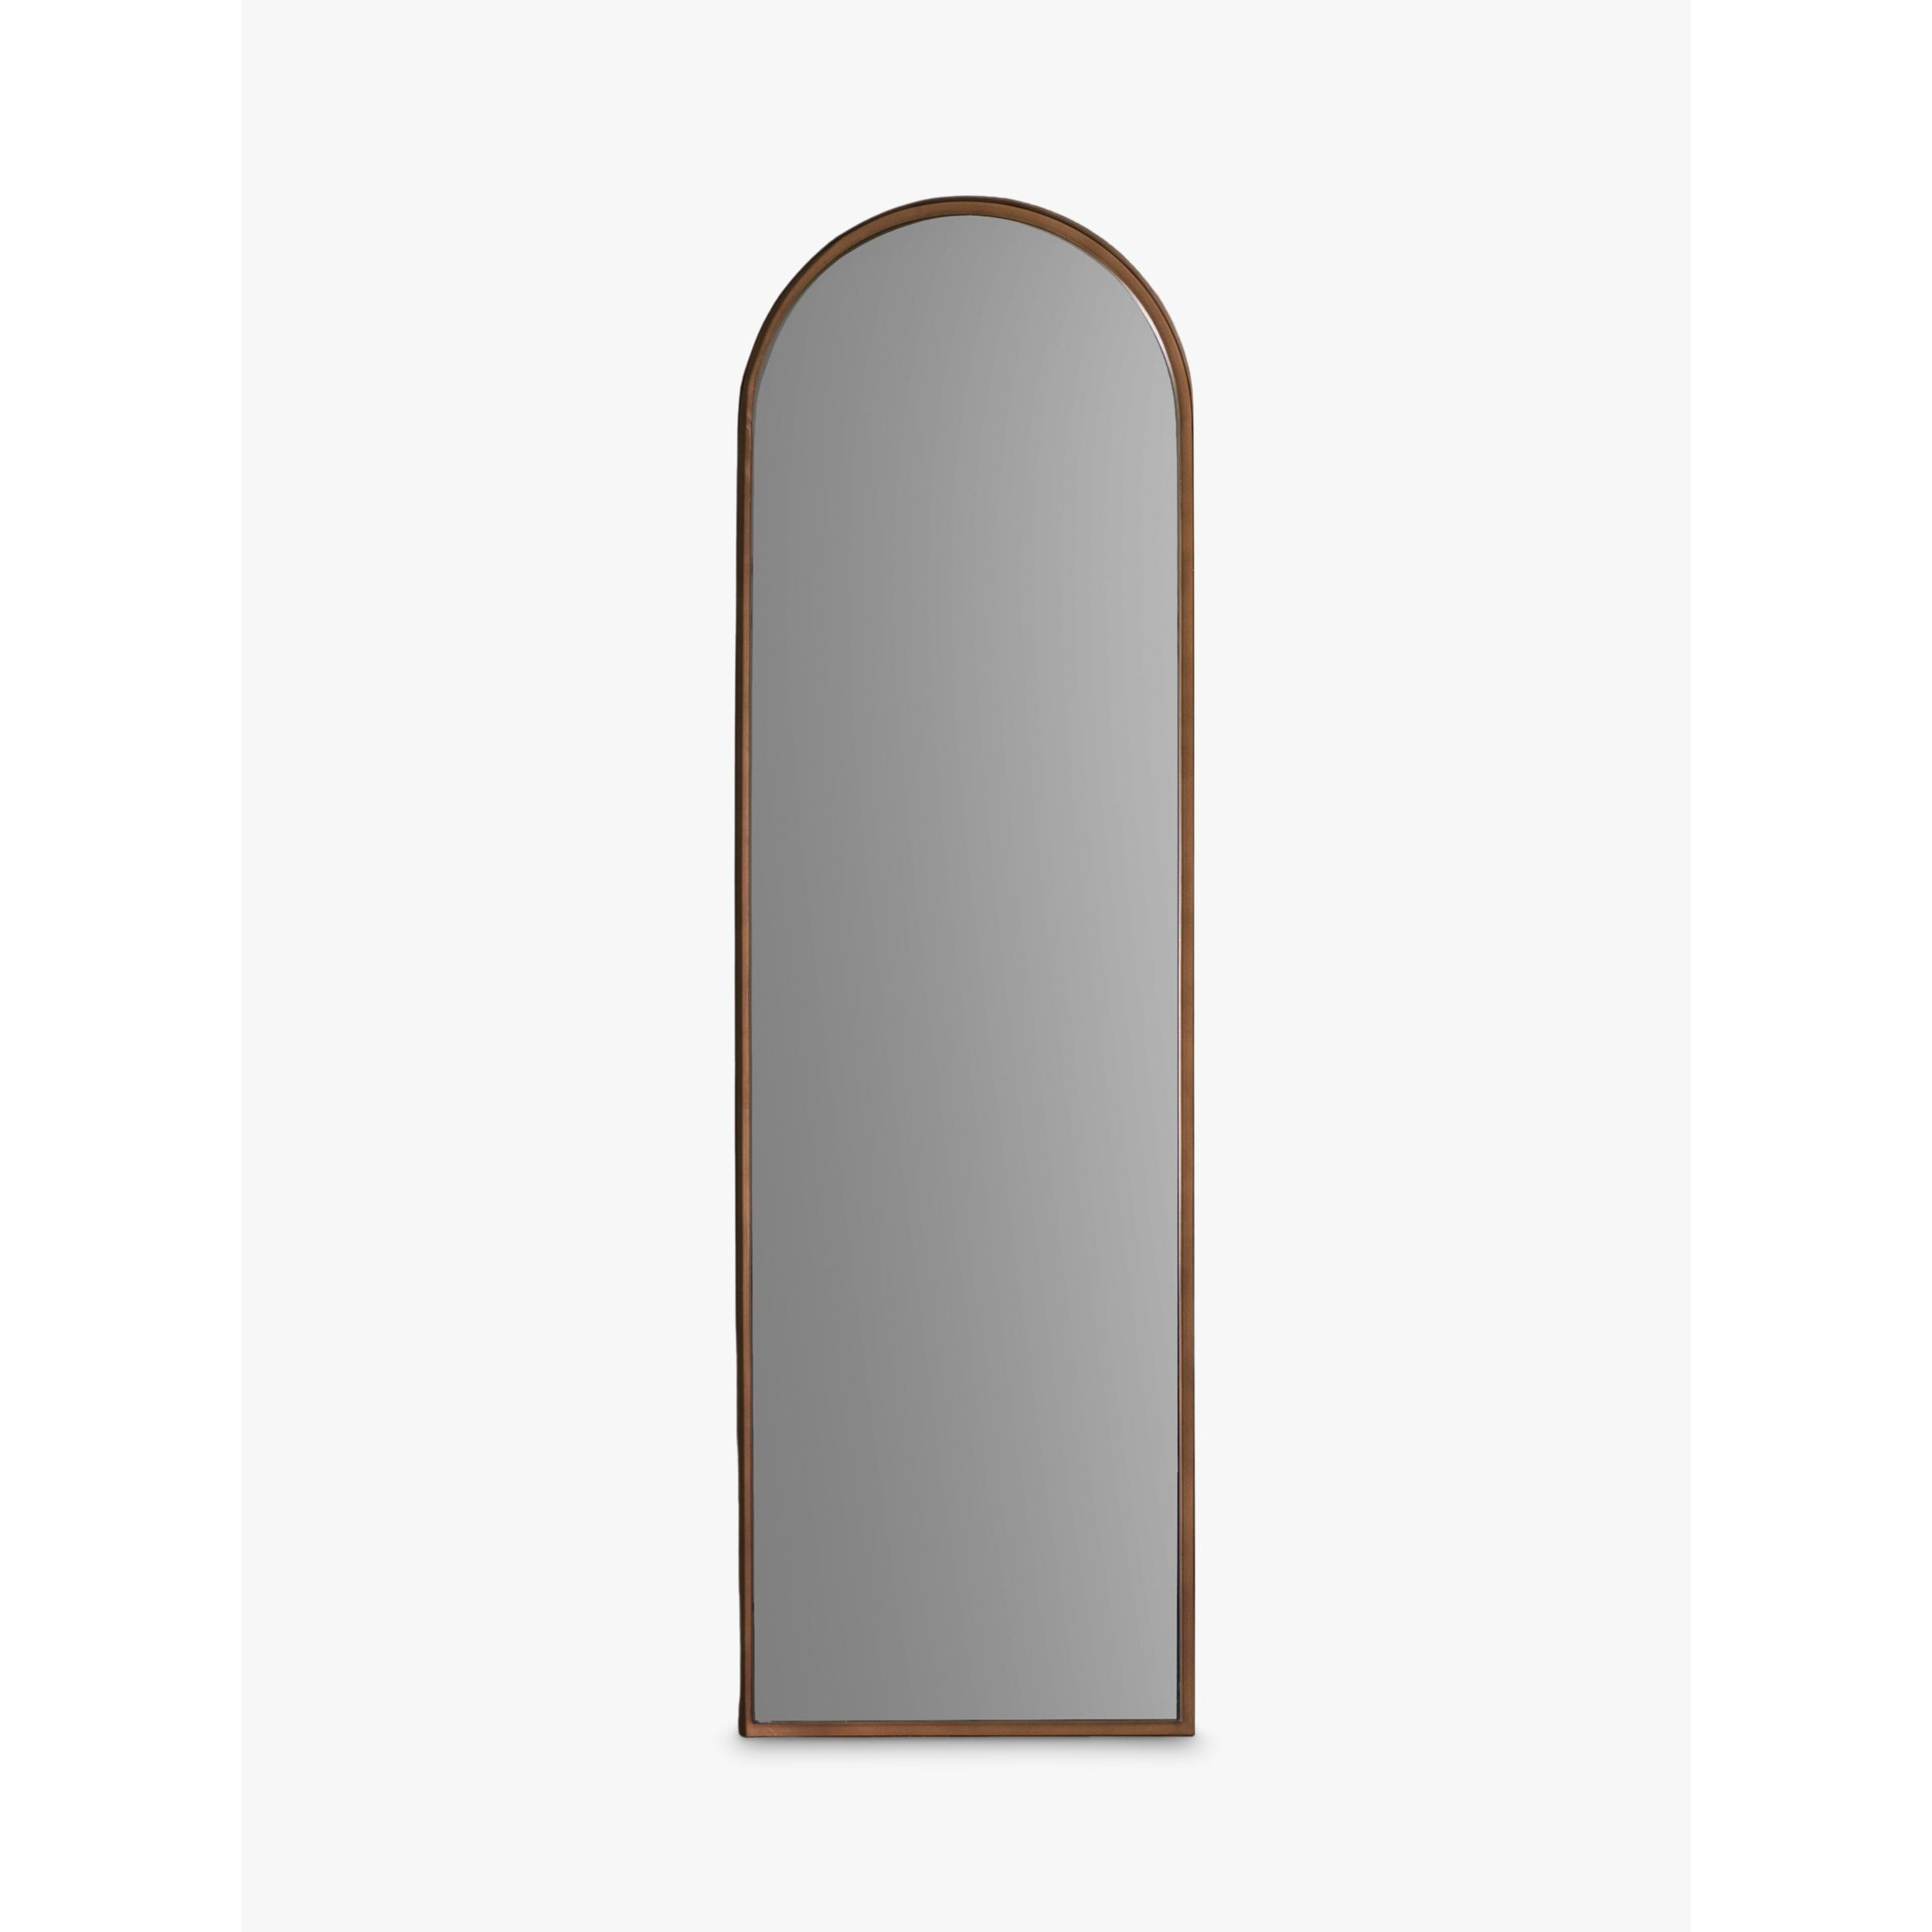 Gallery Direct Greystoke Arched Metal Frame Leaner Mirror, 170 x 50.5cm, Bronze - image 1